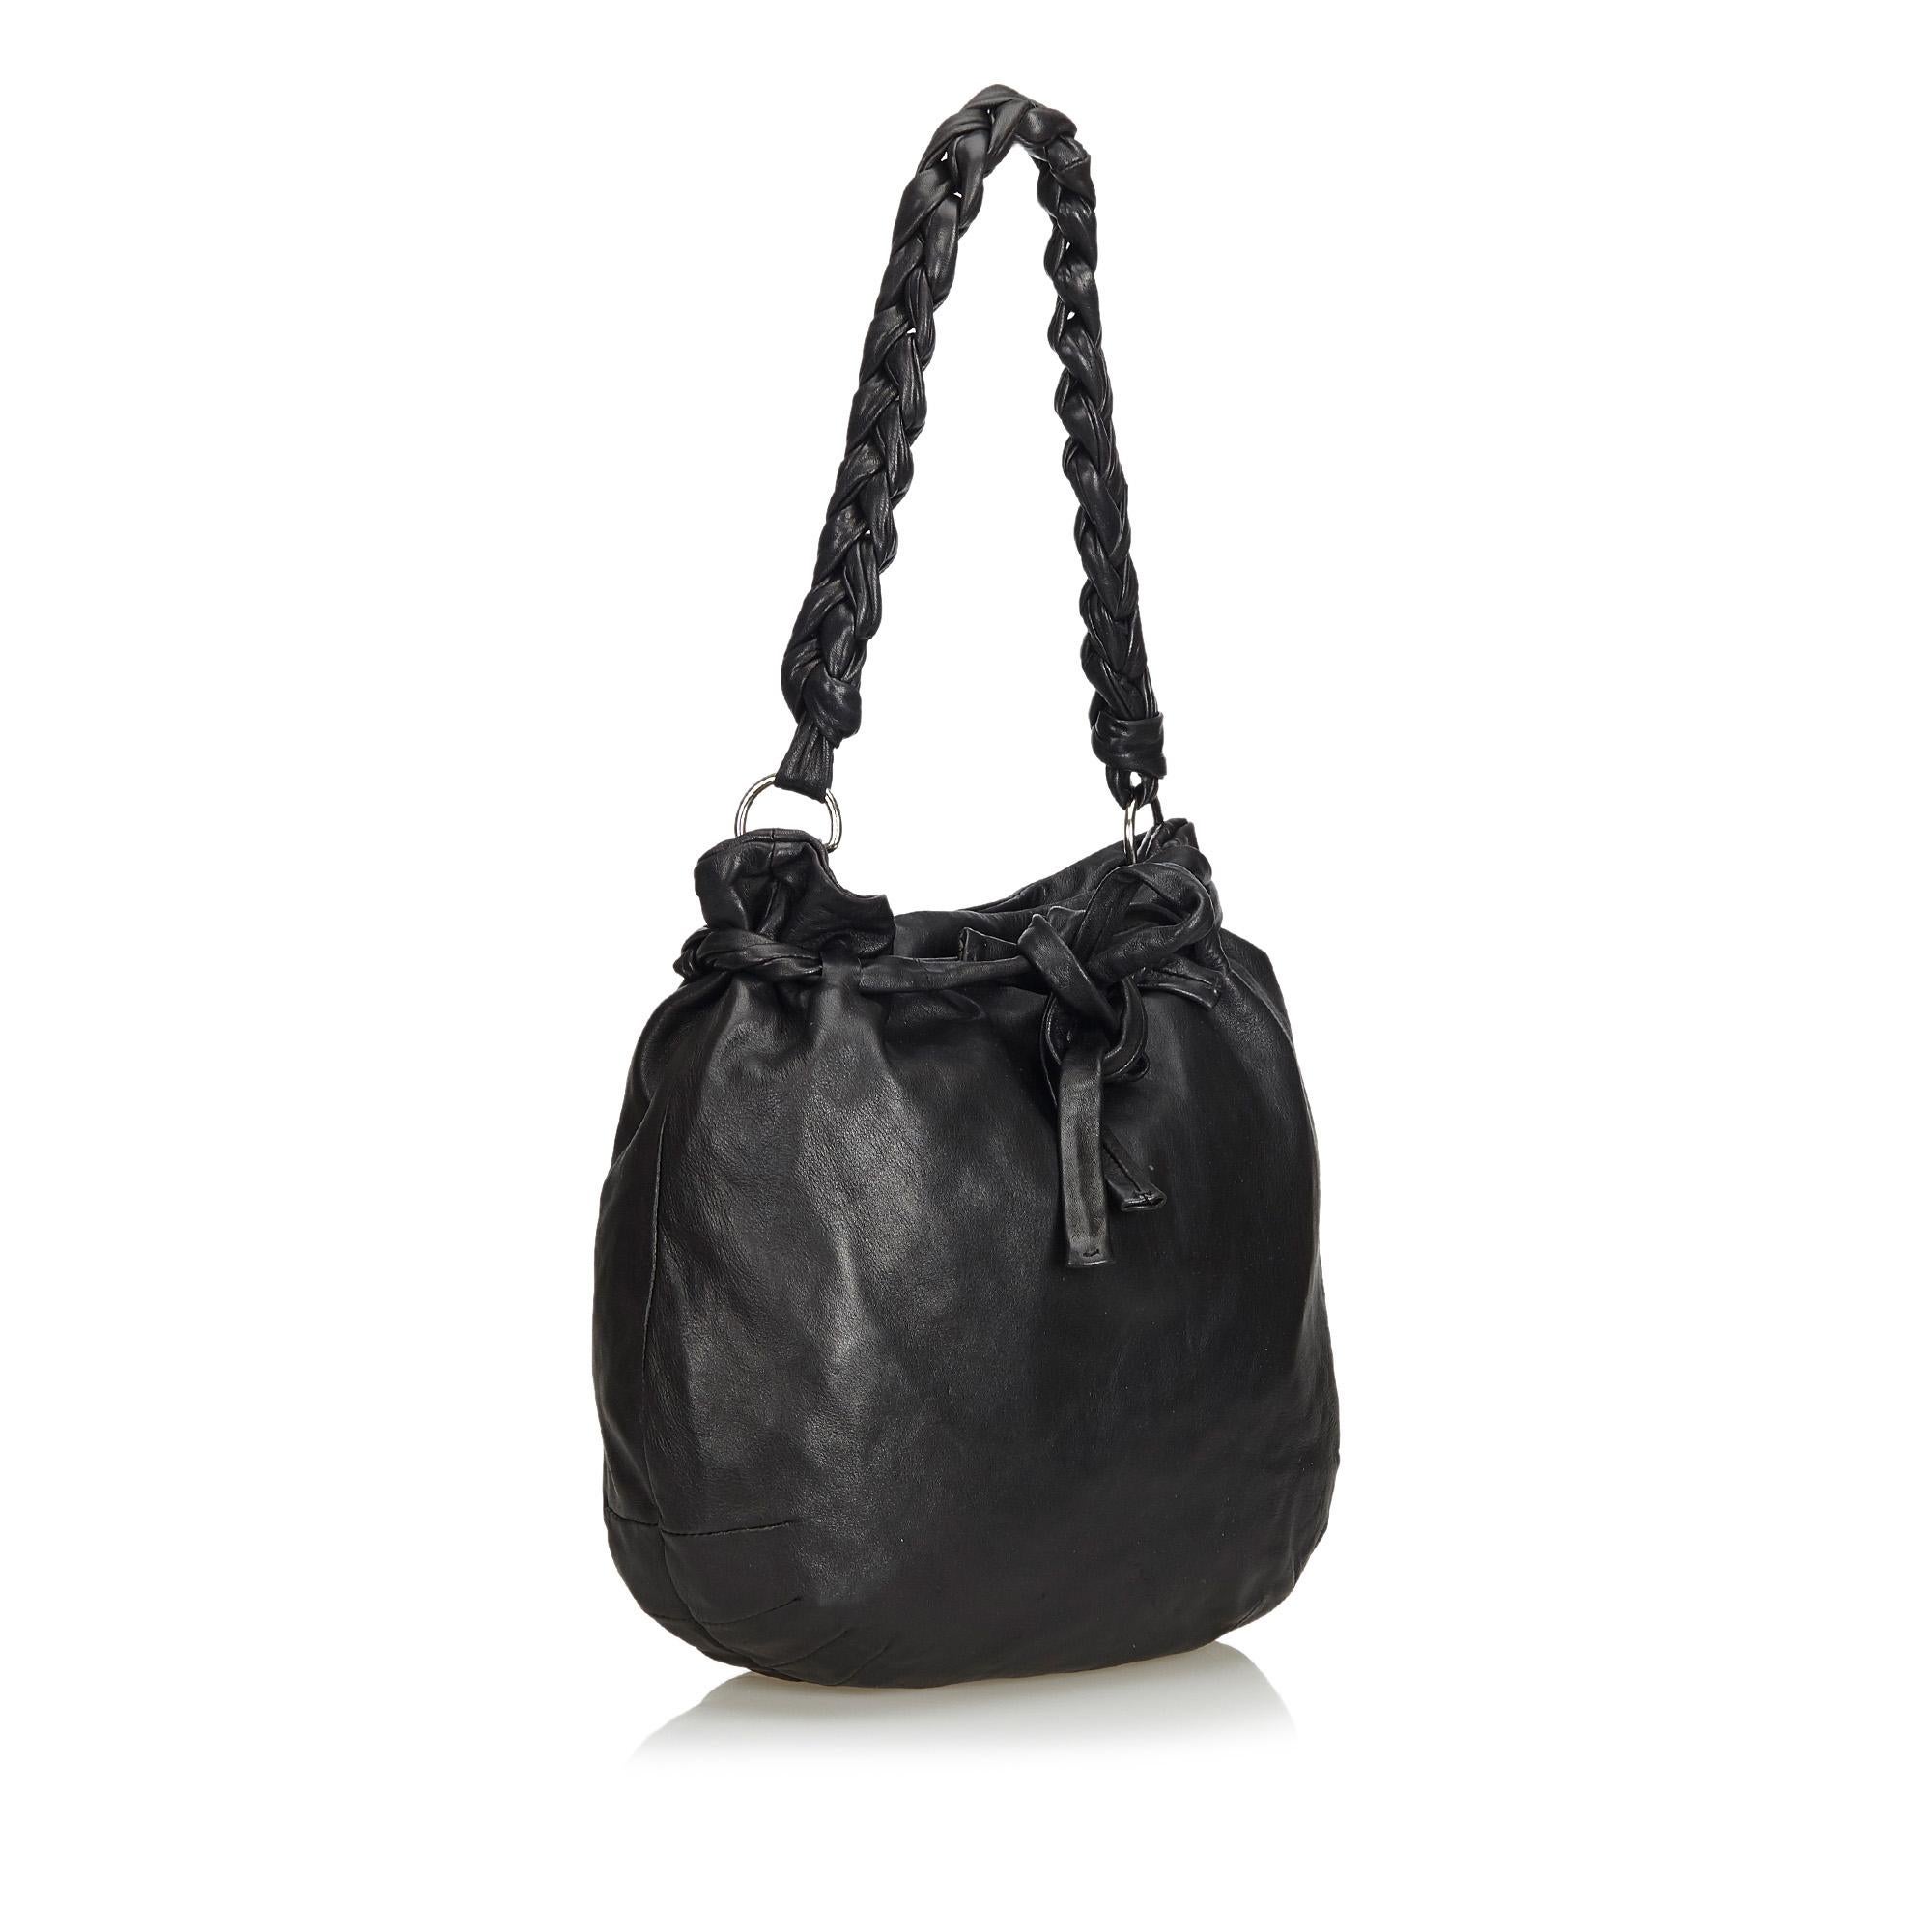 This shoulder bag features a leather body, a braided leather strap, open top with top magnetic closure, and interior slip and zip pockets. It carries as B+ condition rating.

Inclusions: 
This item does not come with inclusions.

Dimensions:
Length: